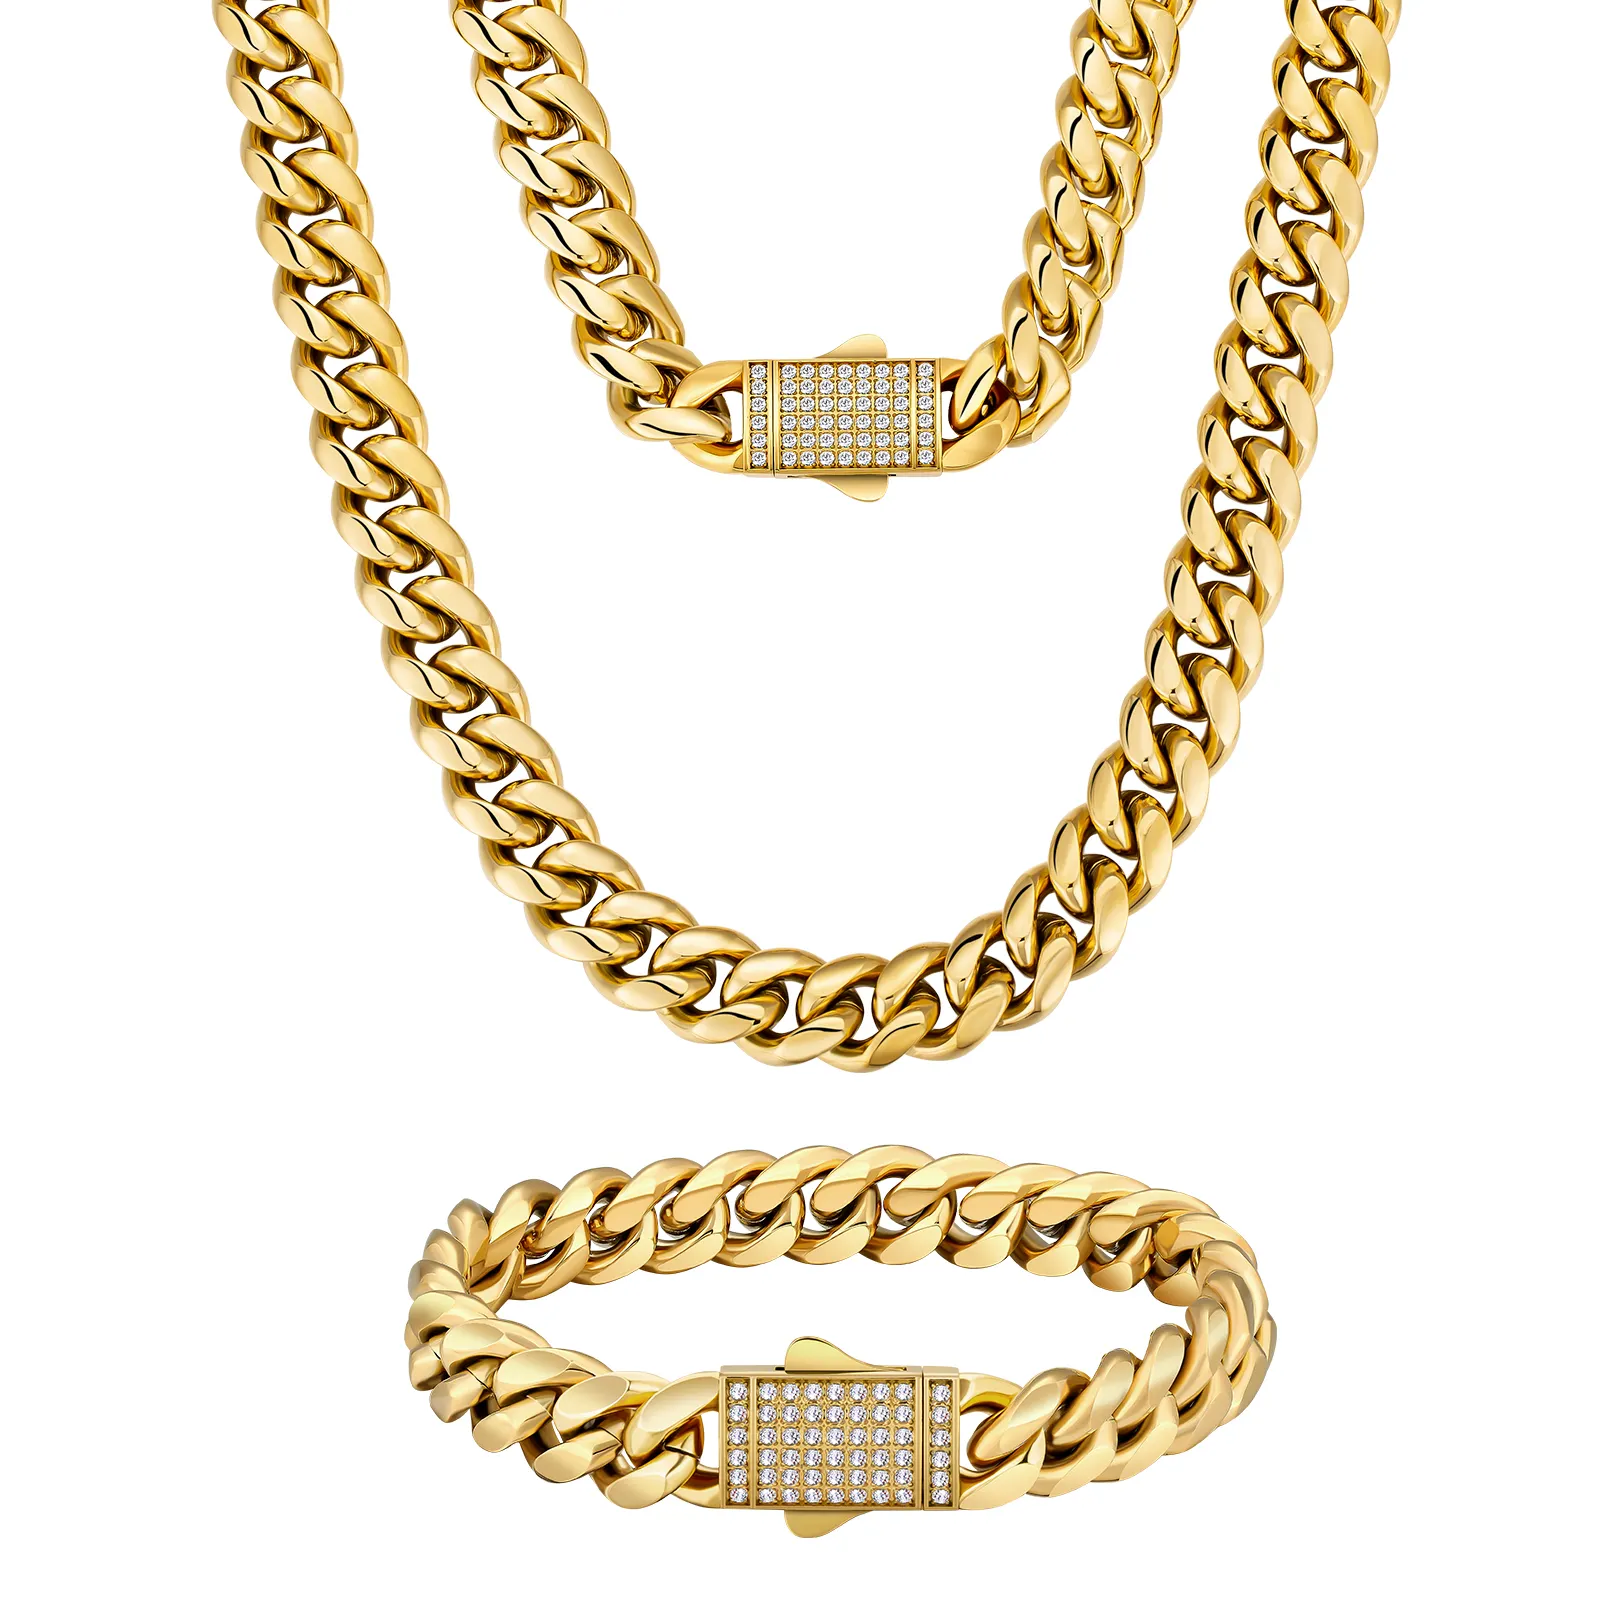 12mm Iced Out Cuban Link Chain Men Women Hip Hop Jewelry Cubic Zirconia Bracelet Real 18K Gold Filled Miami Curb Thick Necklace